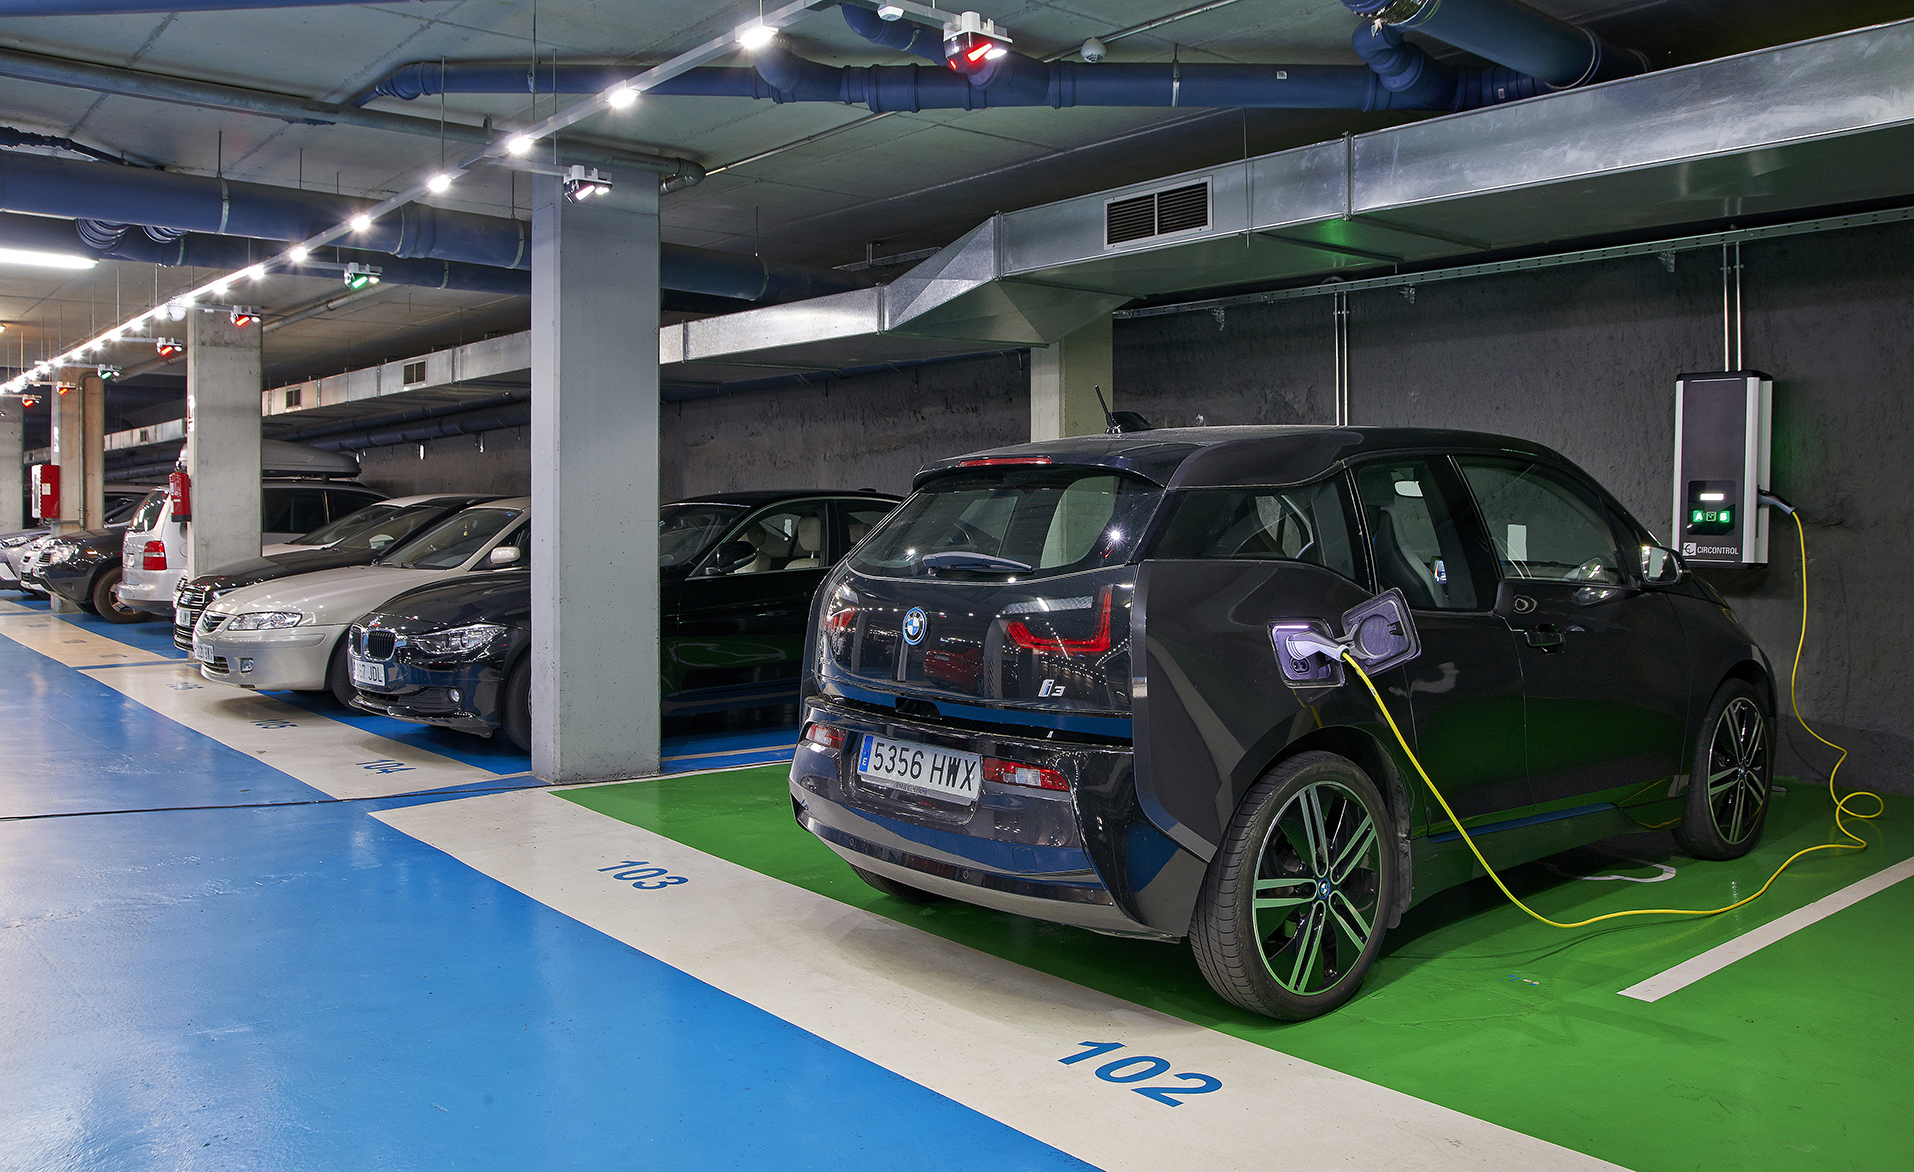 Detect and avoid parking violation in EV charging bays